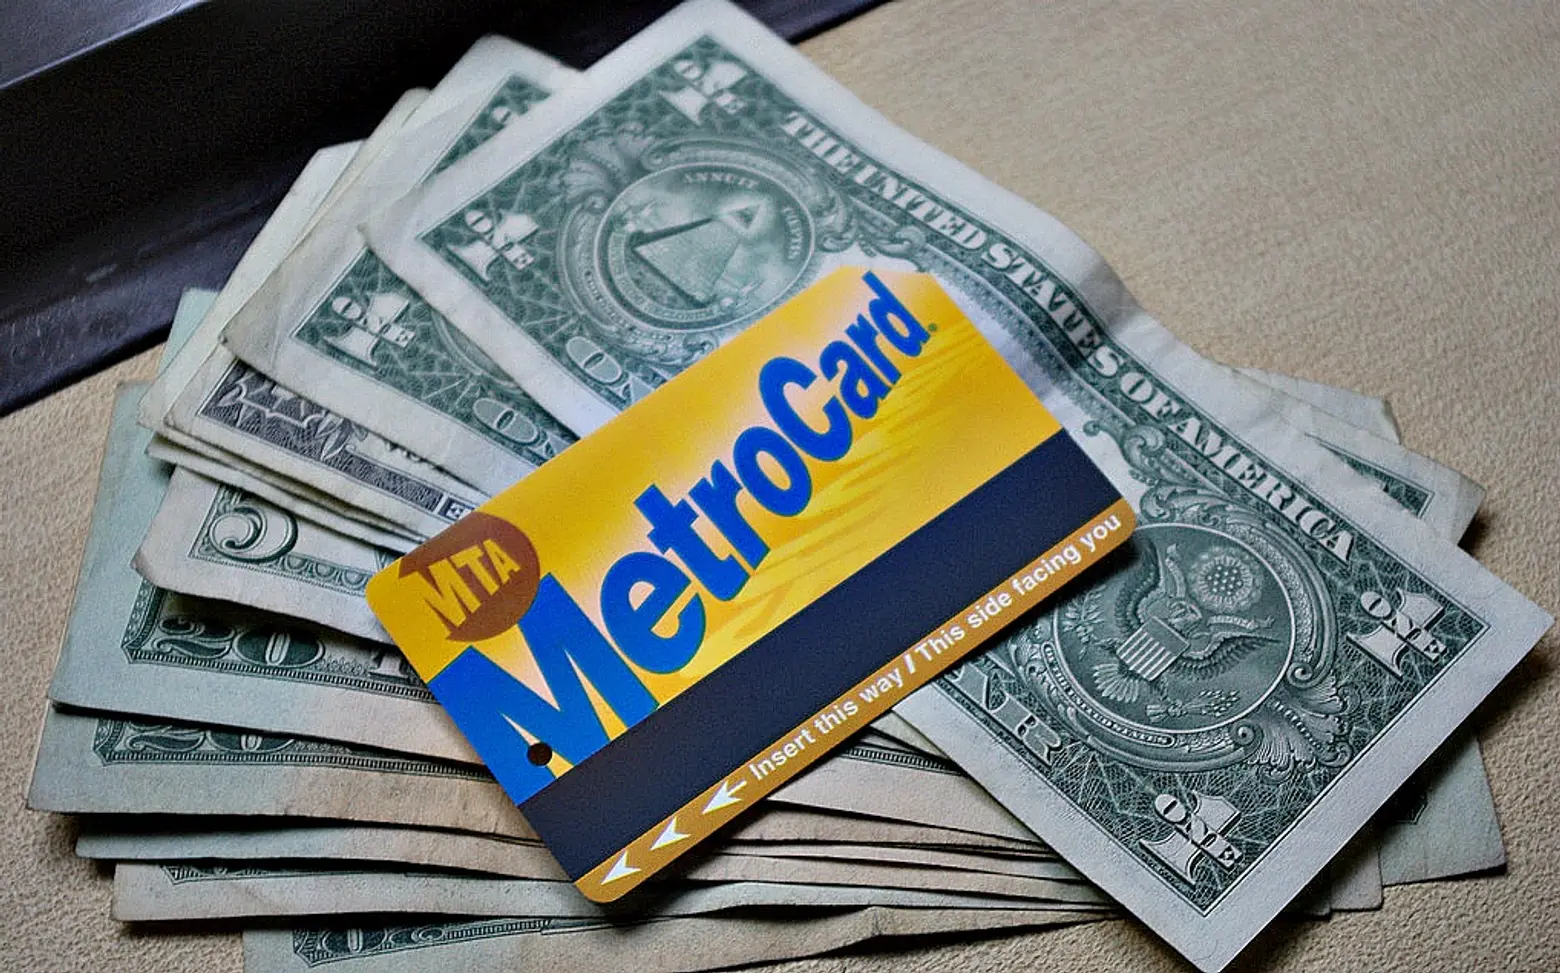 $19.05 Is the Perfect Amount to Load on a MetroCard so You Won’t Have Leftover Change